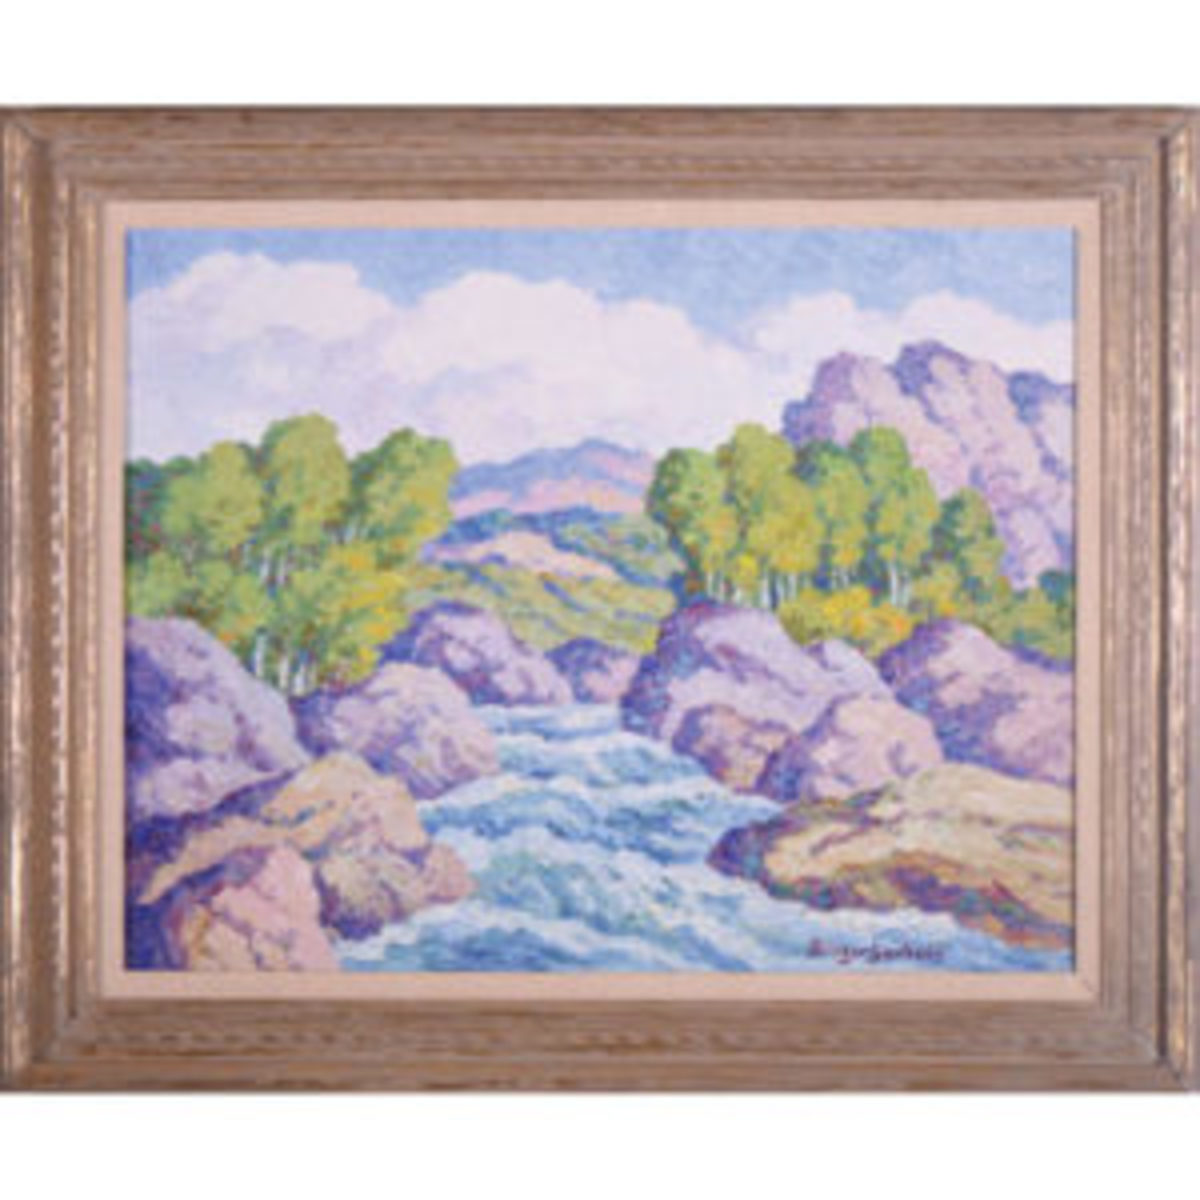 Original oil on board painting signed by the Swedish-born American painter Birger Sandzén (1871-1954), titled In Boulder Canyon, Colorado (1949), $39,000.